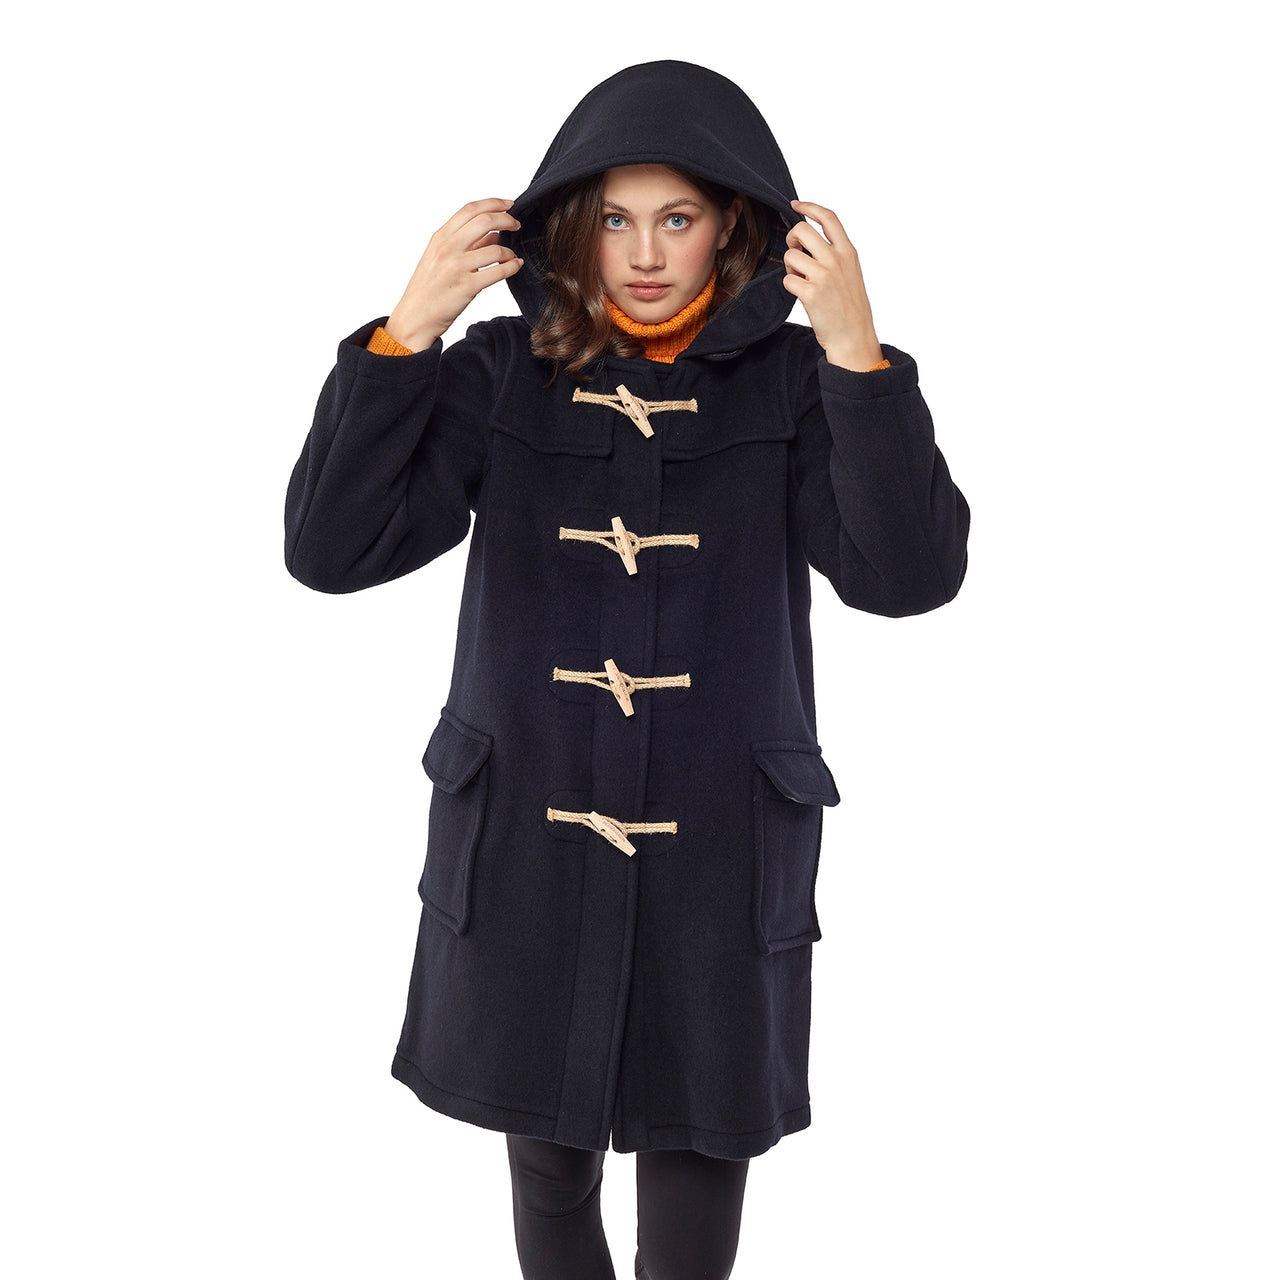 Women's Navy Original Classic Fit Duffle Coat with Wooden Toggles